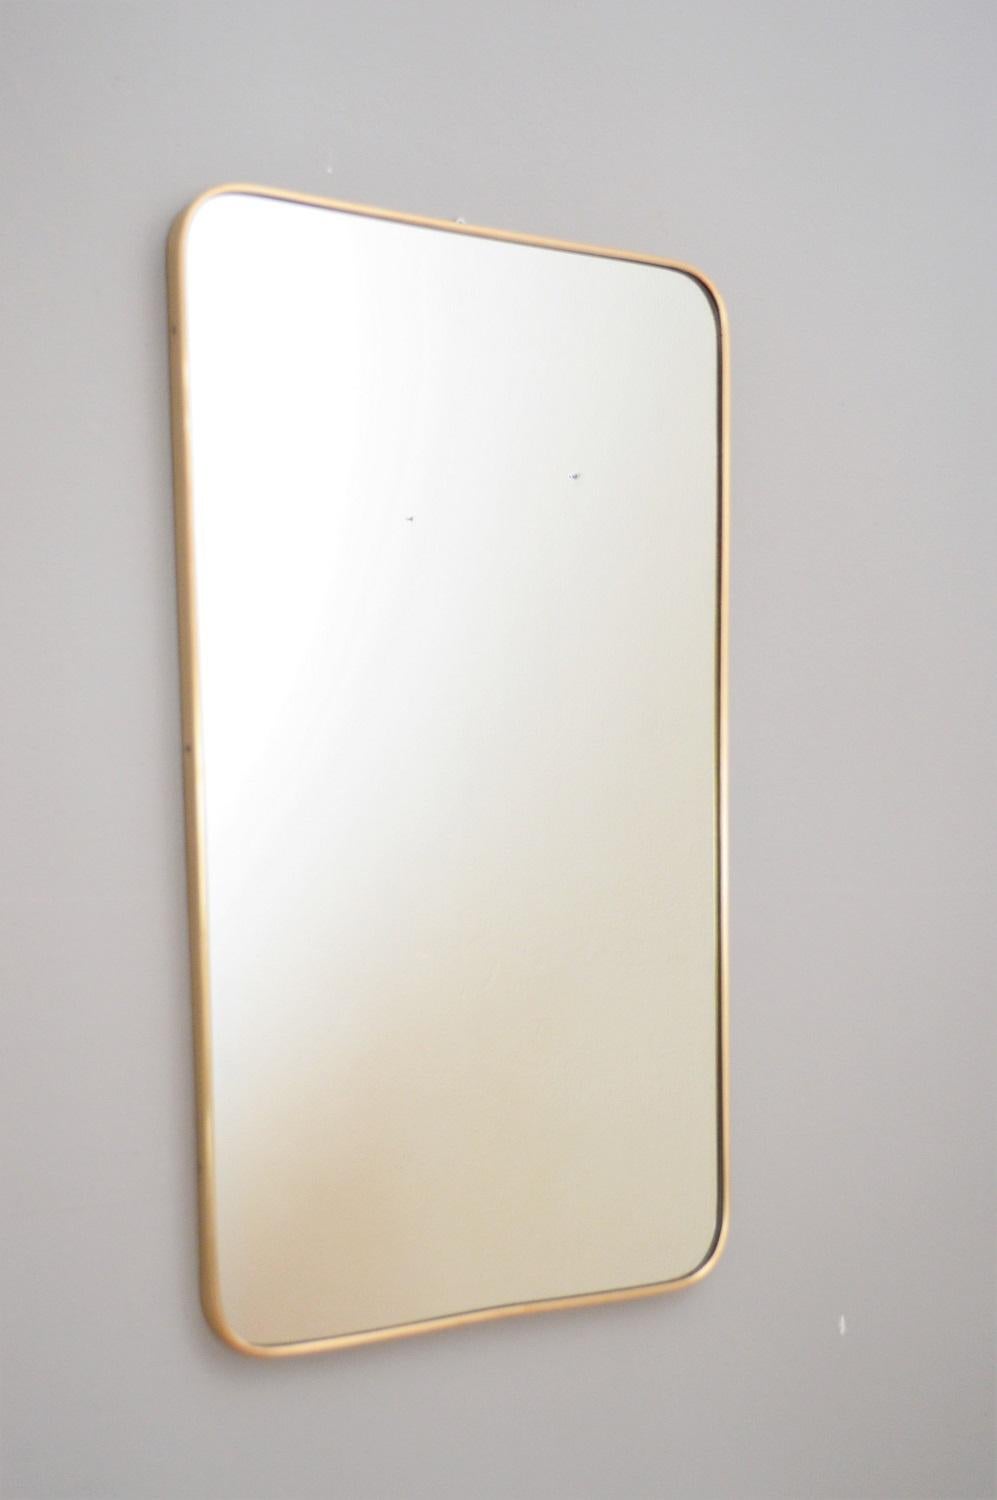 Beautiful big crystal glass wall mirror with brass frame, typical for the Italian midcentury age.
Made in Italy from Sant'Ambrogio & De Berti in 1959. The original sticker is inside the mirror.
The mirror is in the original shape, the brass frame